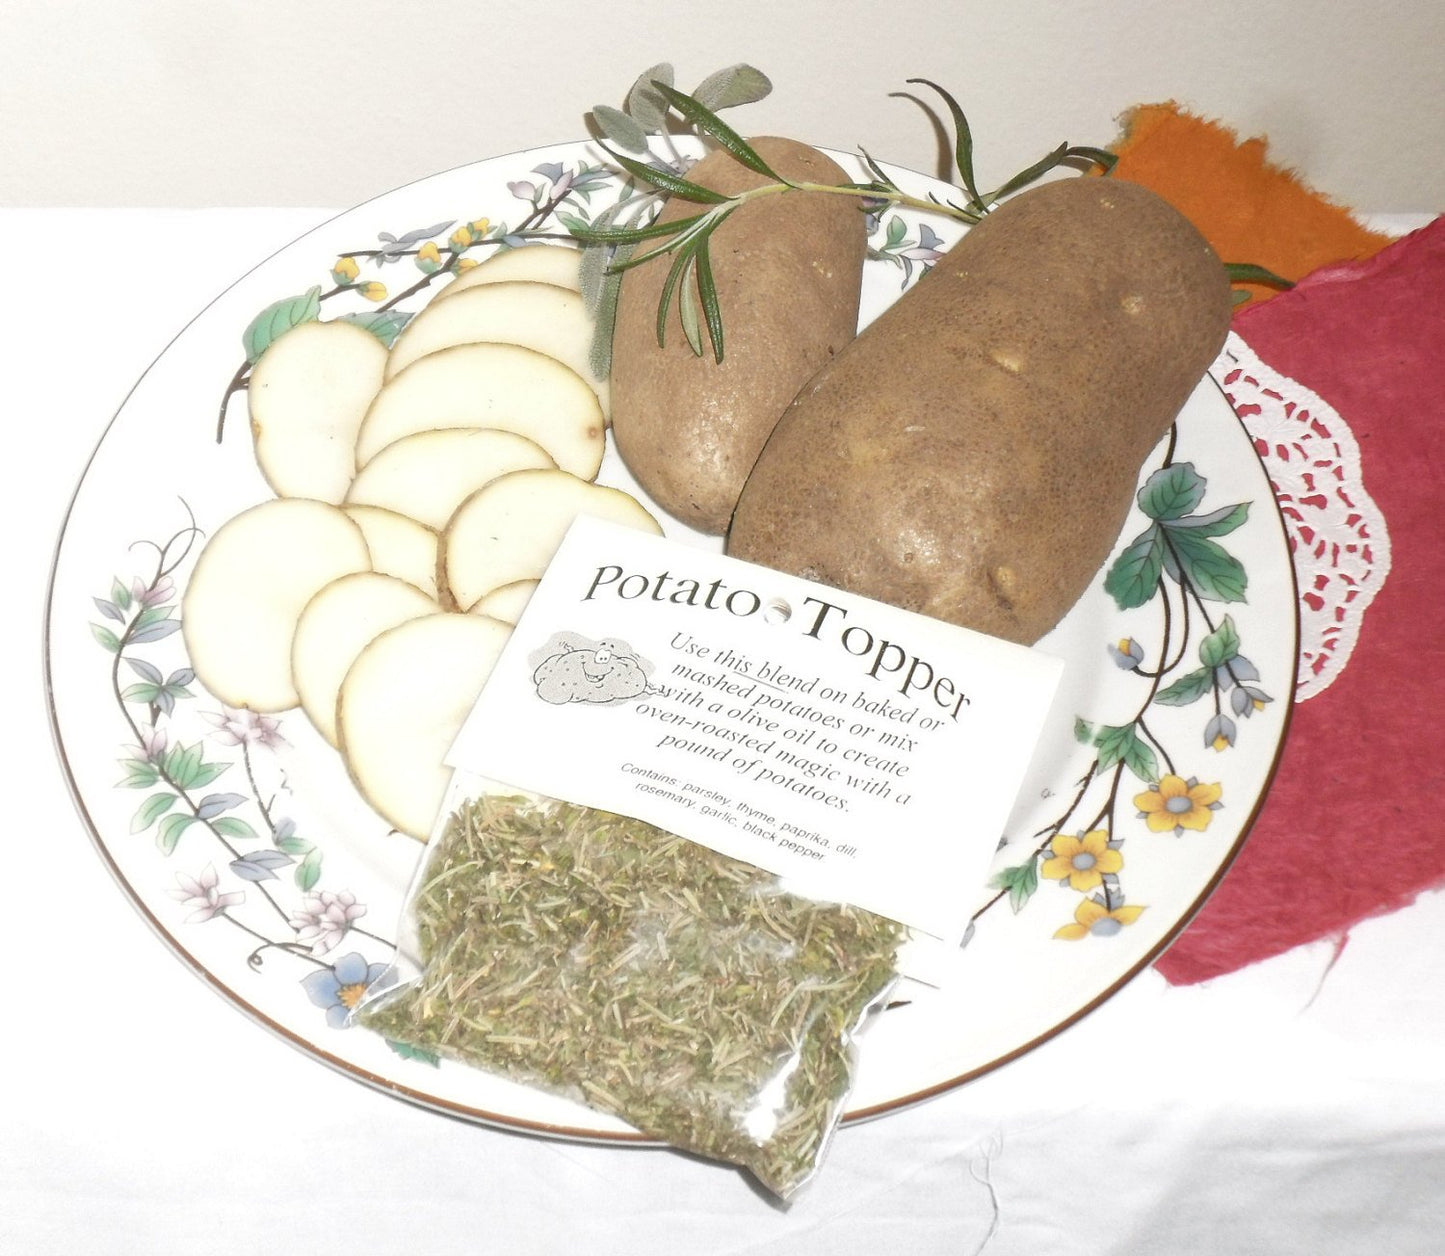 SPUD COLLECTION Set of 5 Dry Herb Mixes, hand-blended, home grown herb mixes for potatoes, no salt, no gluten, no MSG